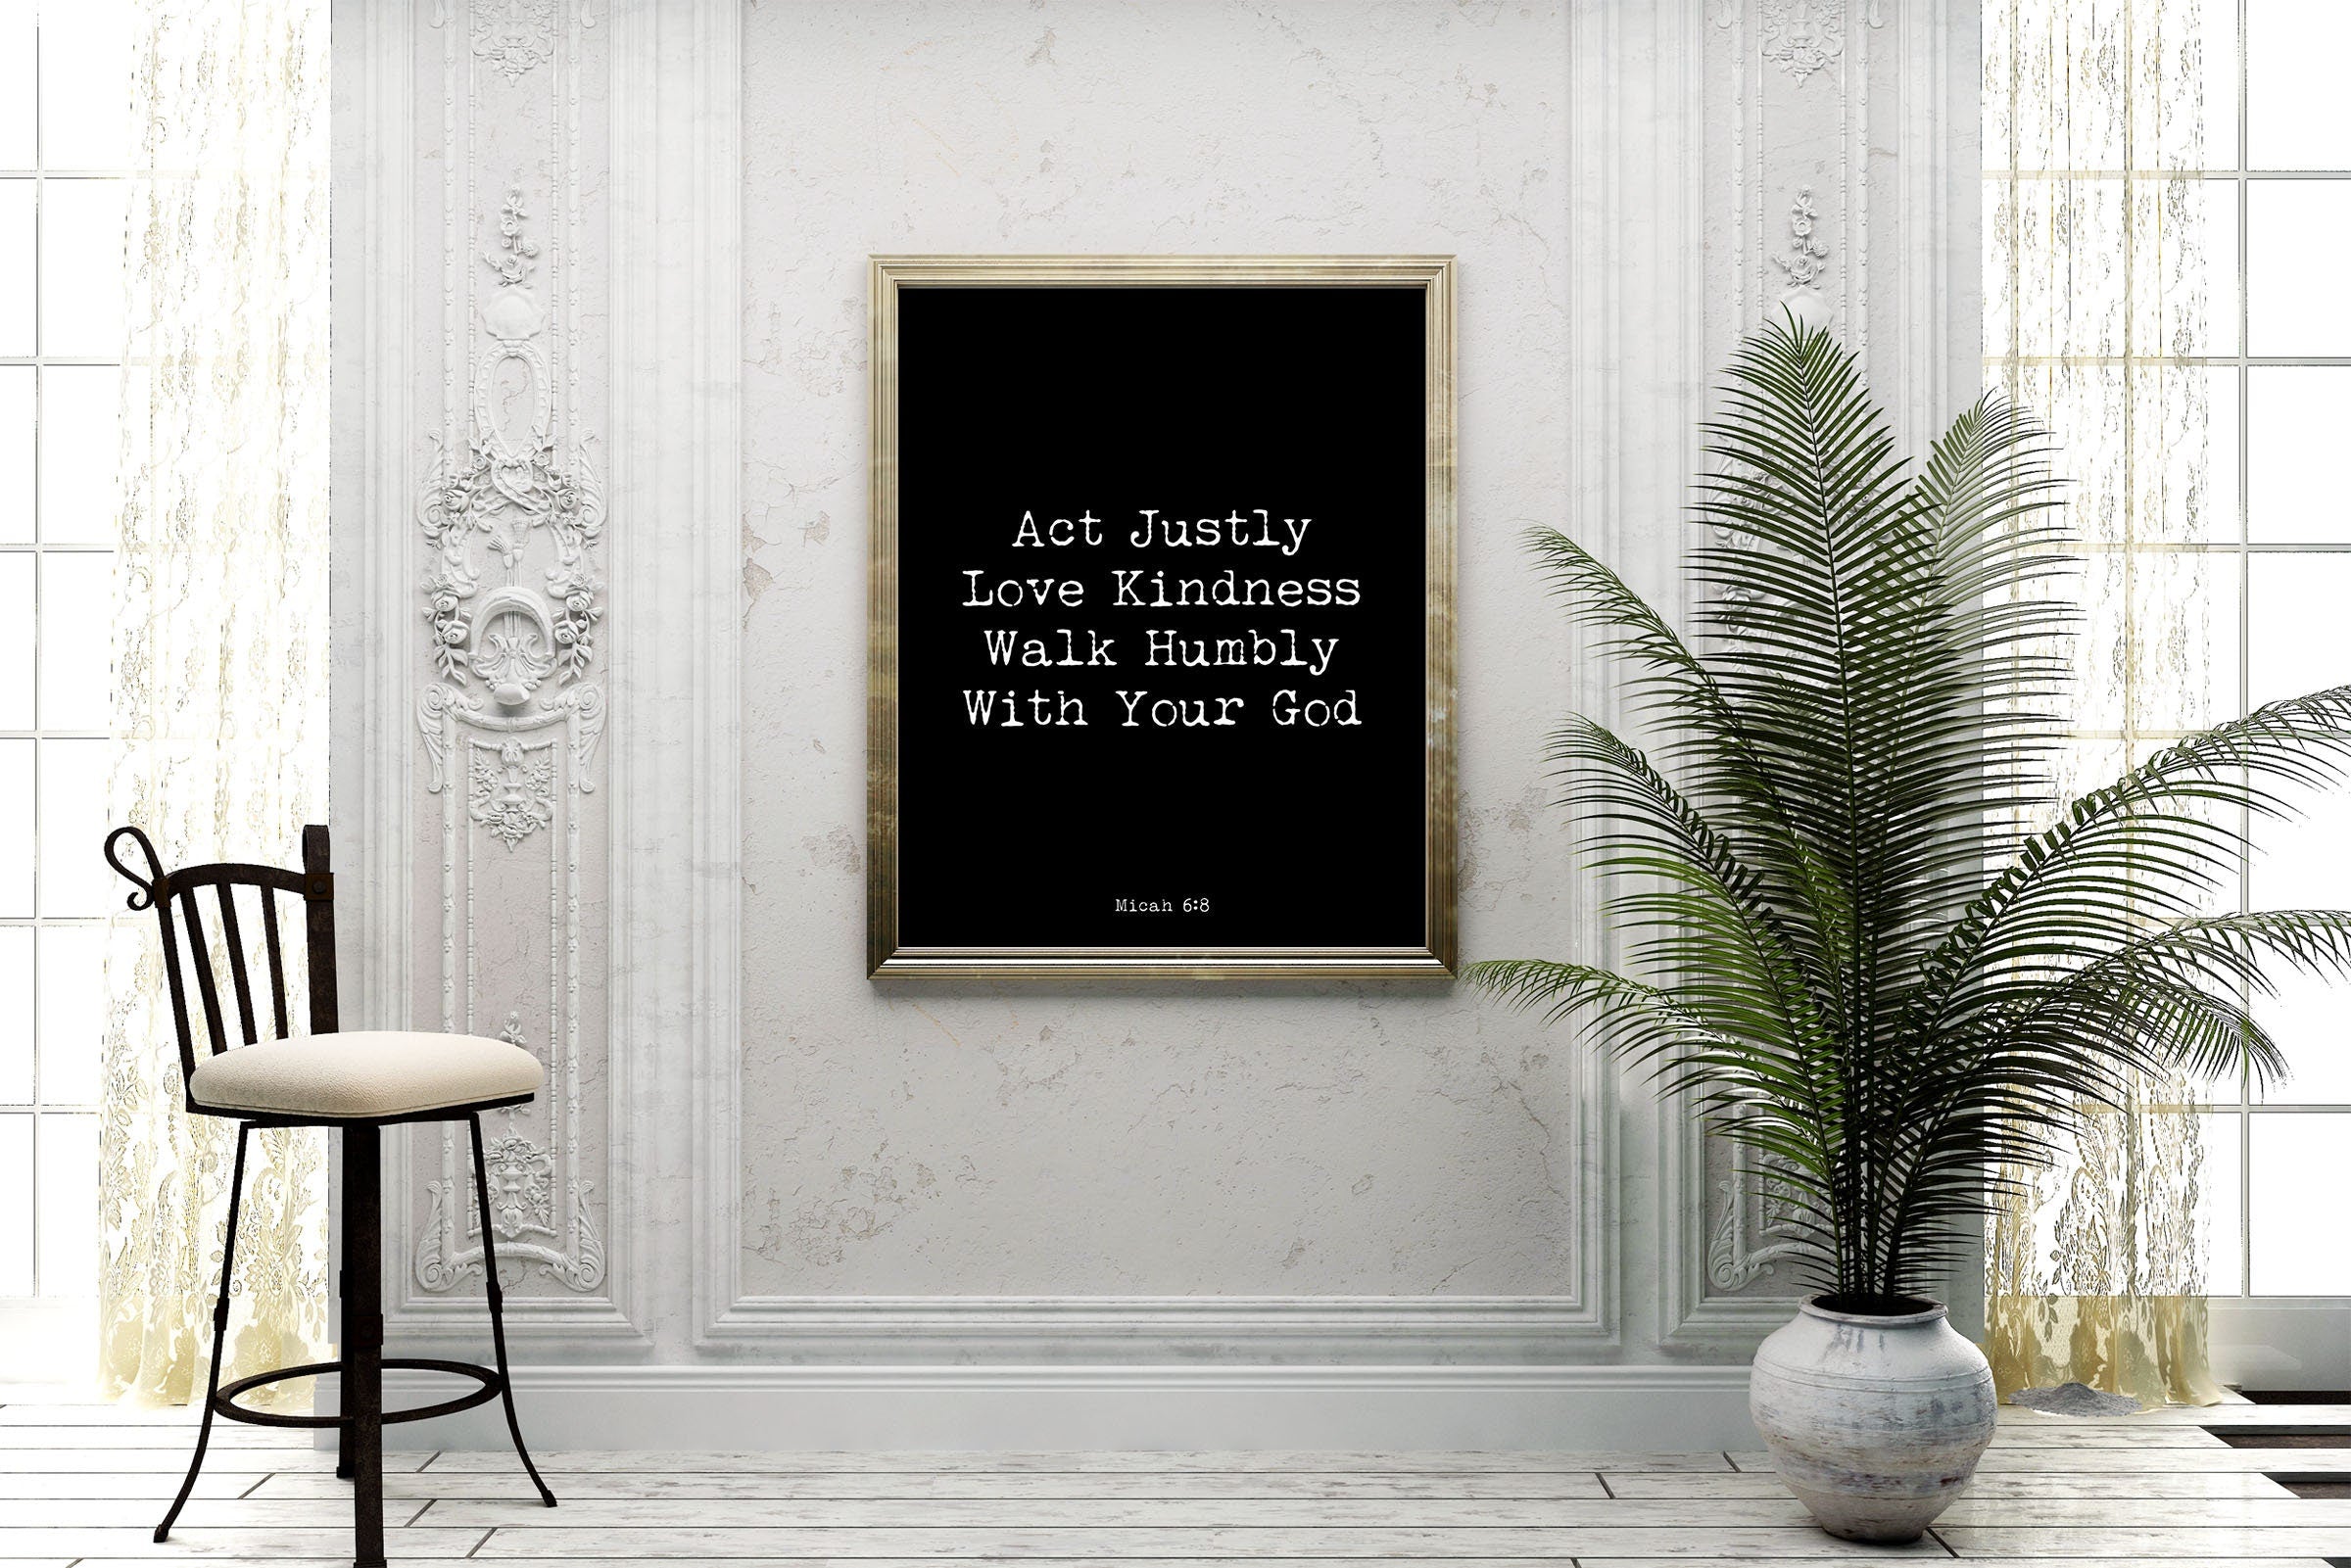 Micah 6:8 Bible Verse Quote Print, Love Kindness Walk Humbly Wall Art in Black & White